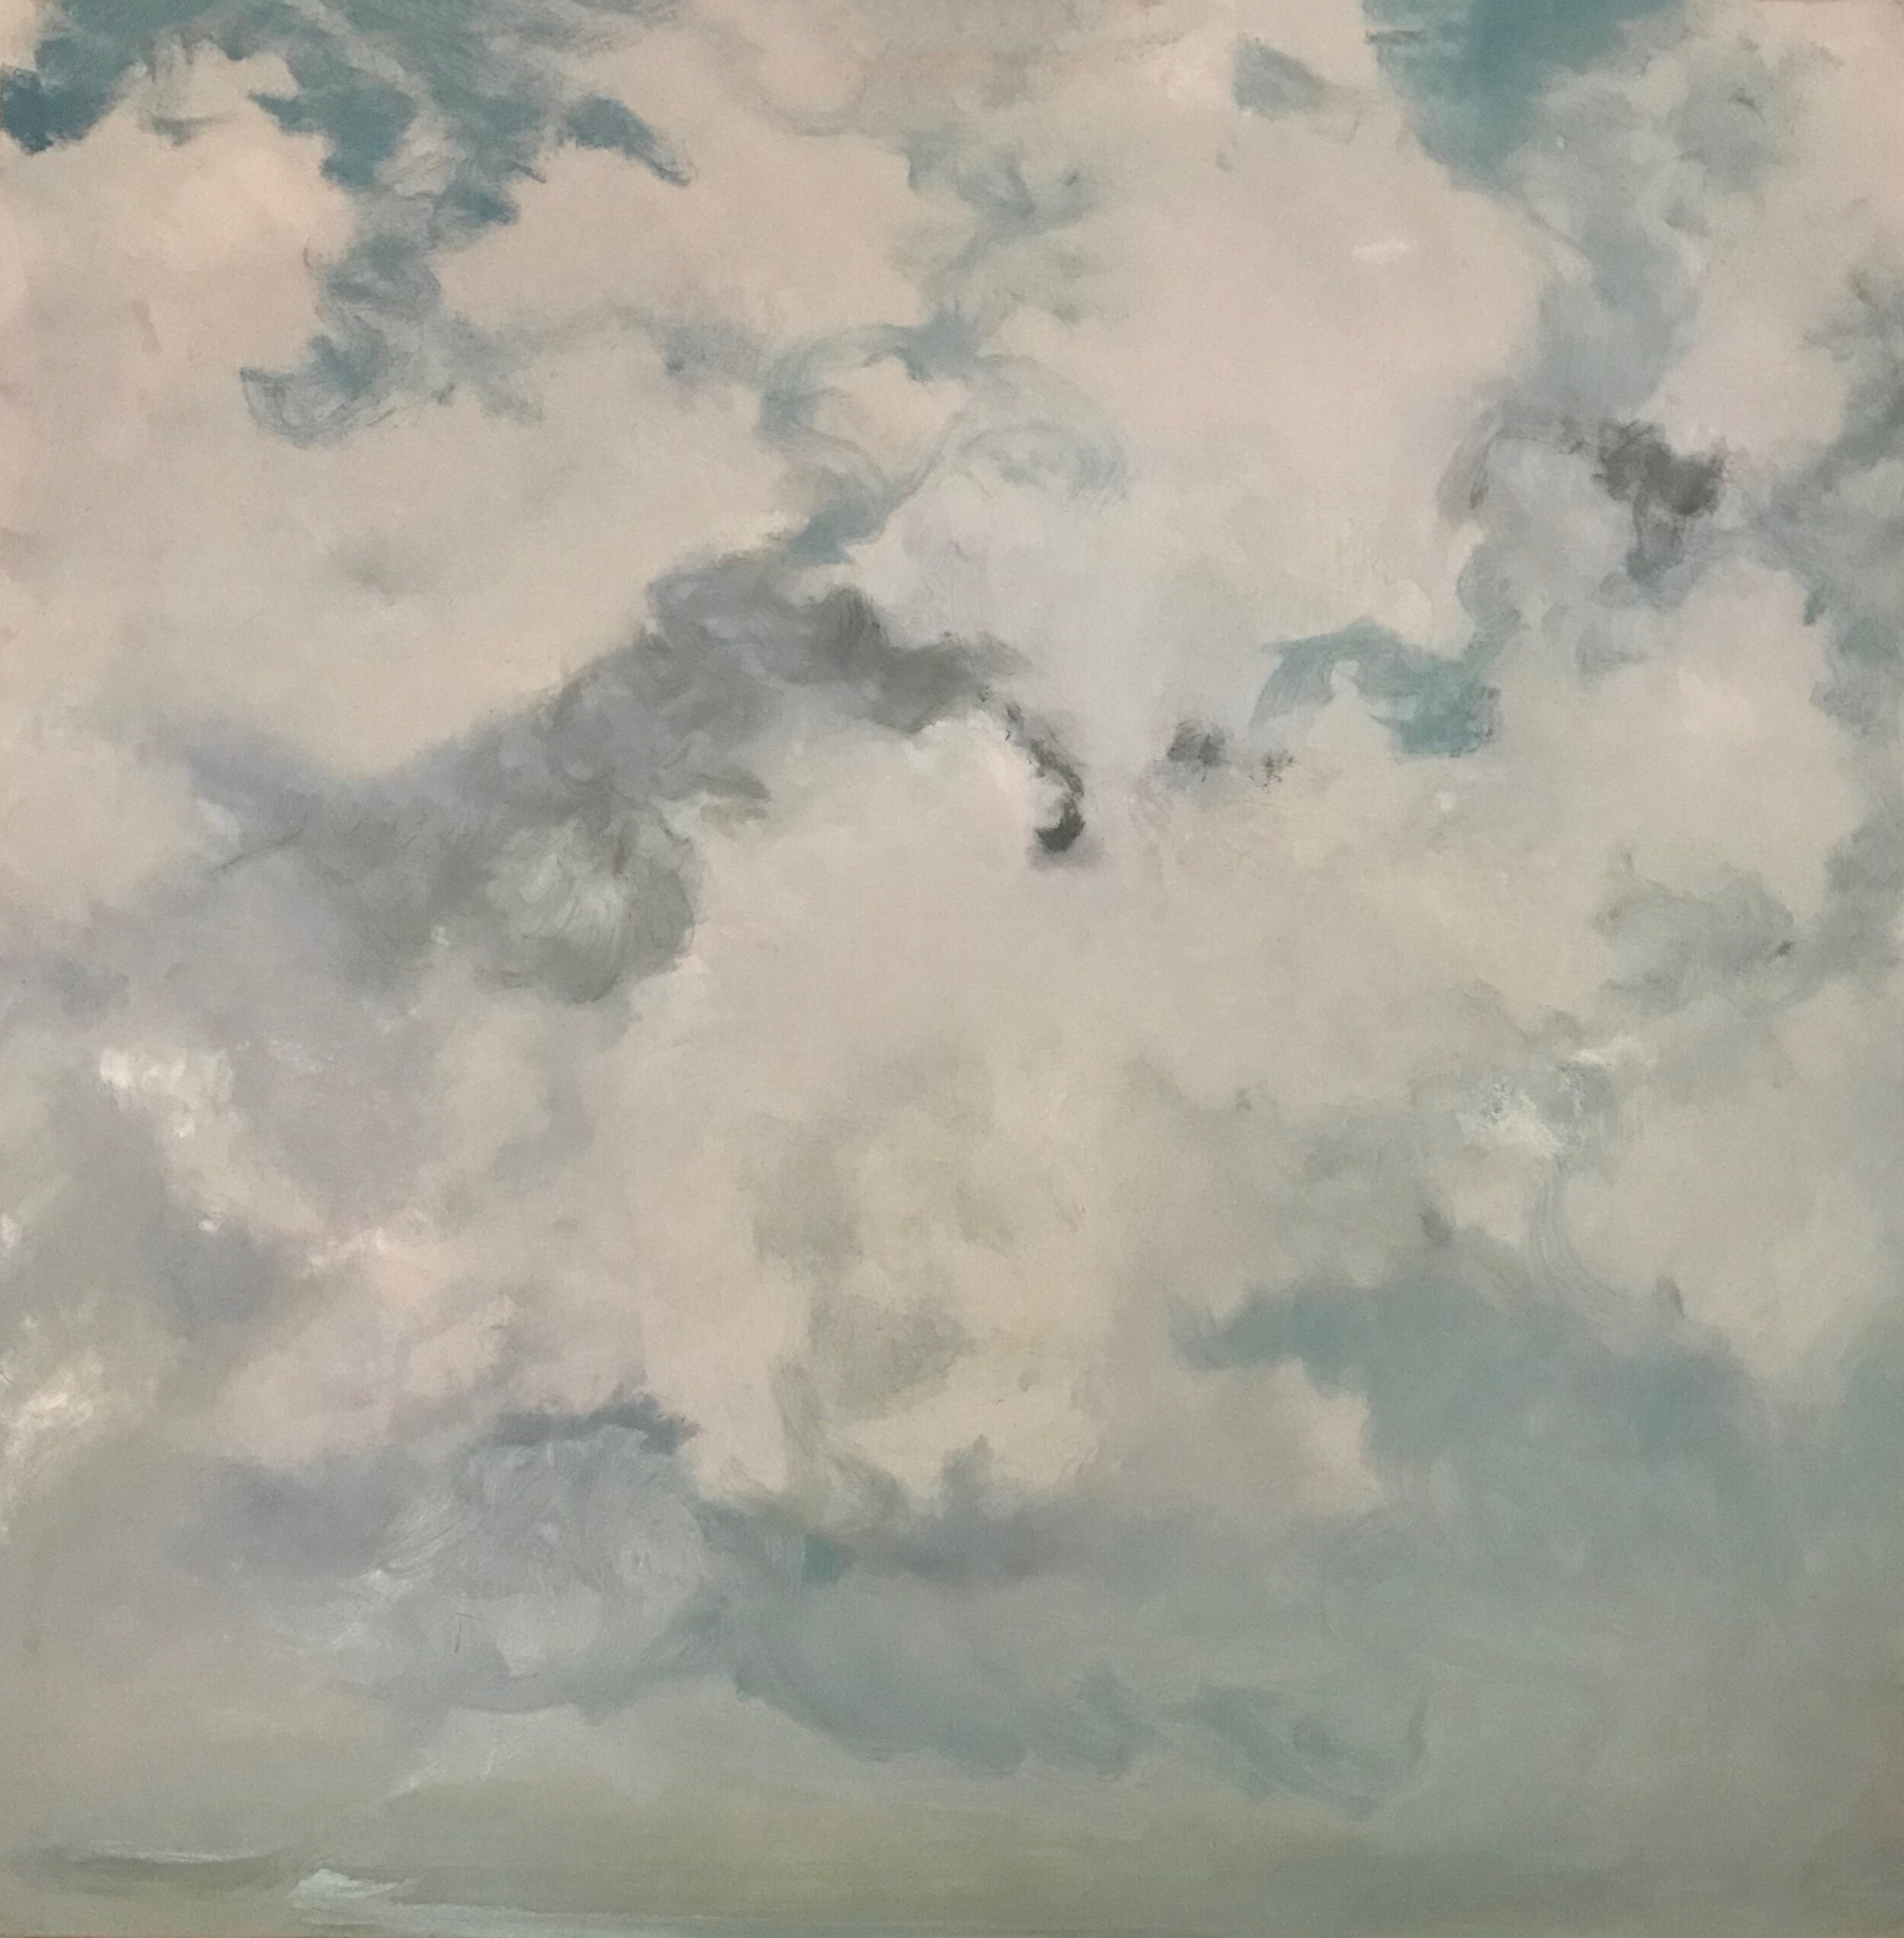  clouds  42 x 42 oil on canvas  